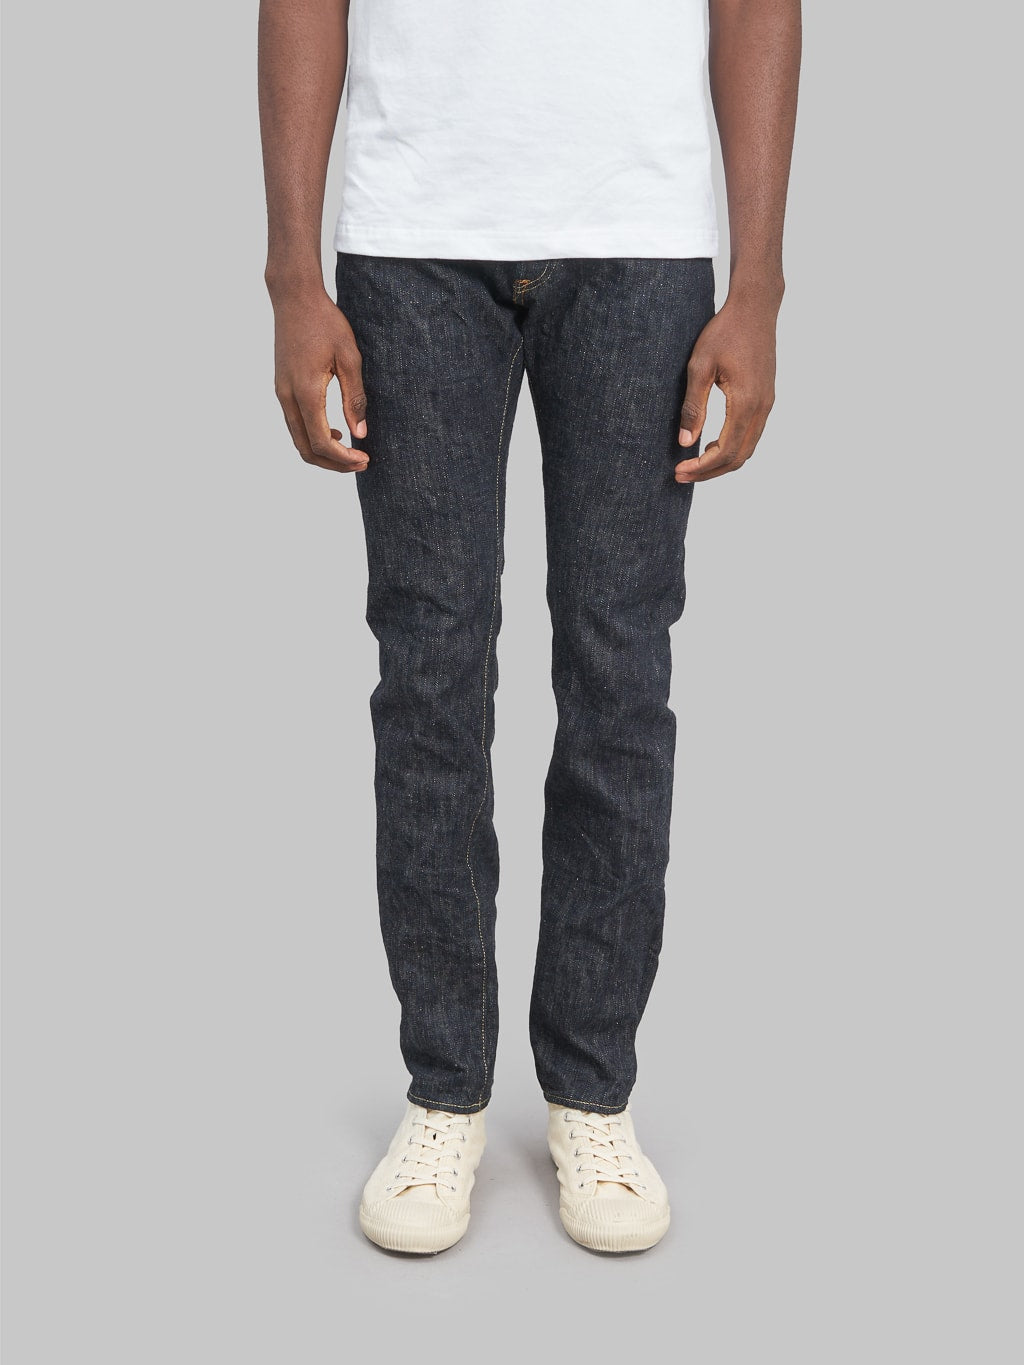 Oni denim kihannen relaxed tapered jeans front fit